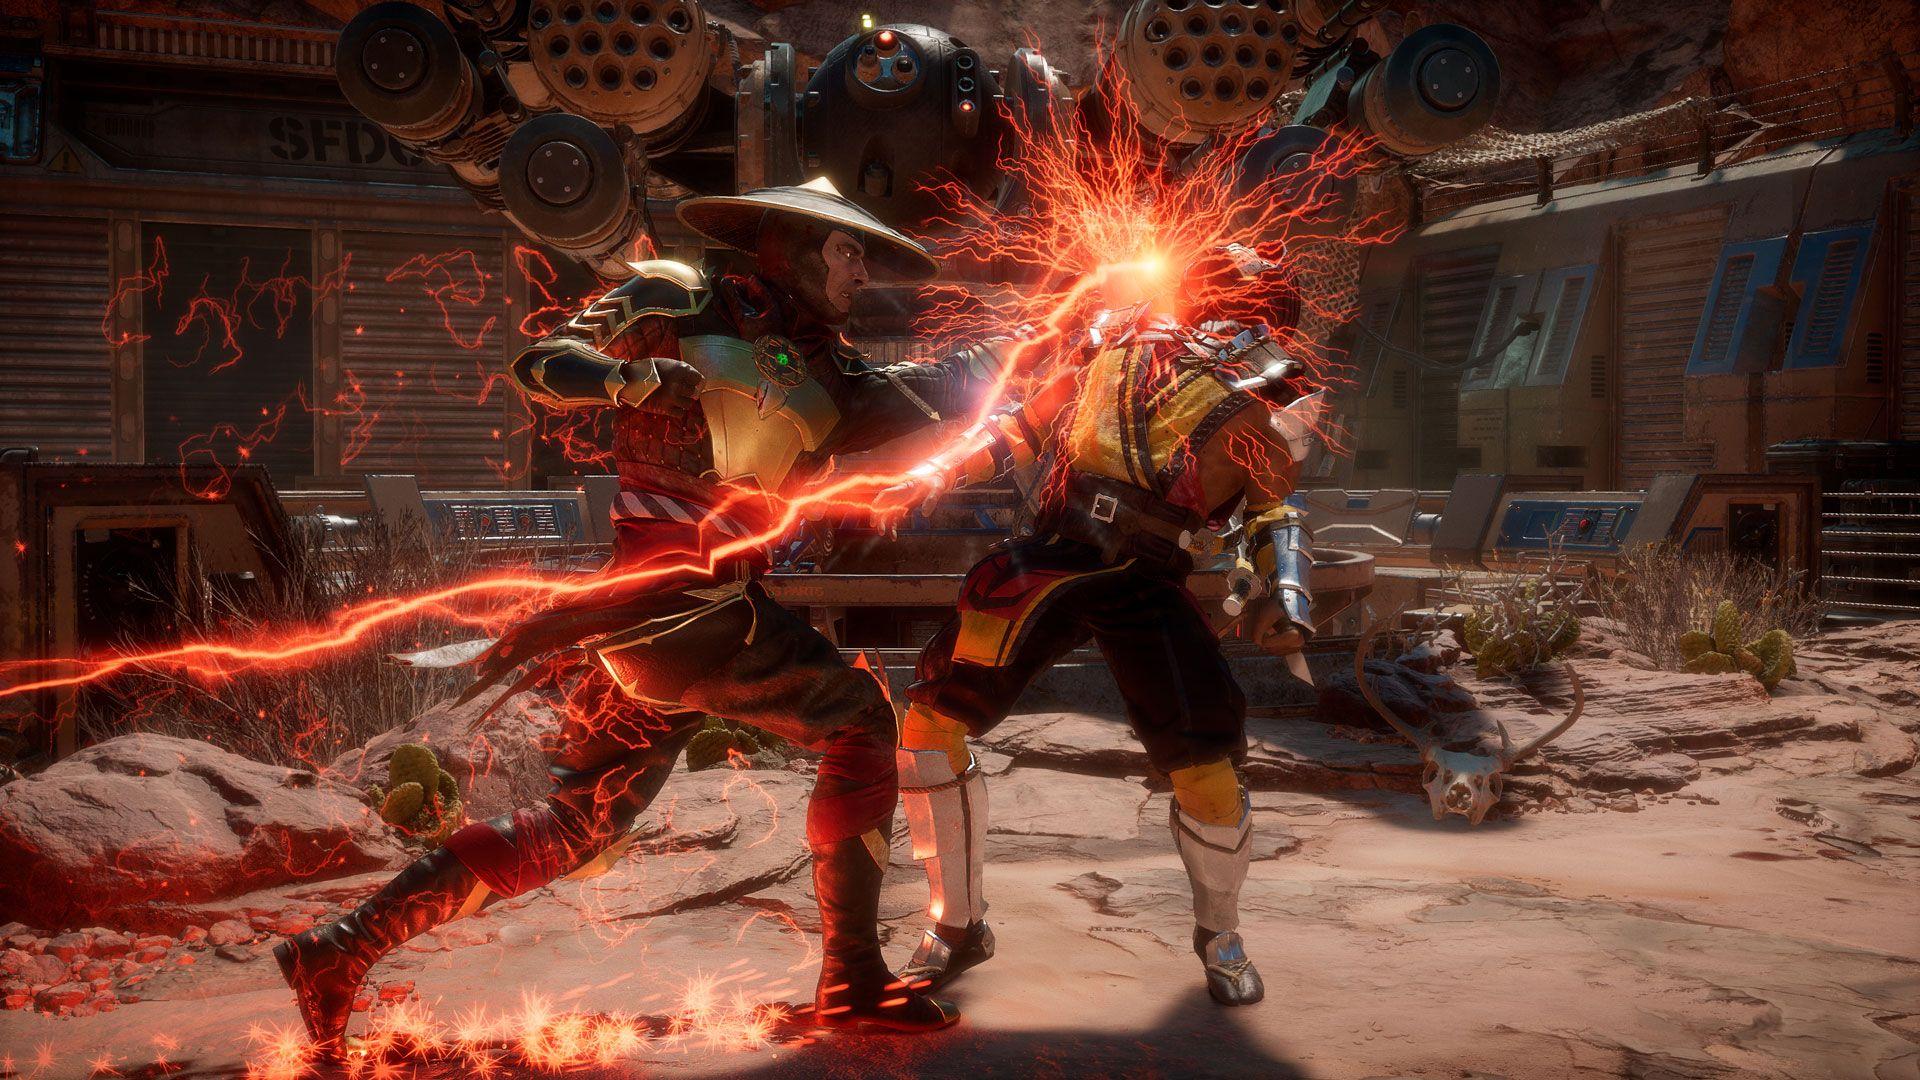 Mortal Kombat 11 Director Ed Boon is Still Holding Out Hope For an E Rating from the ESRB